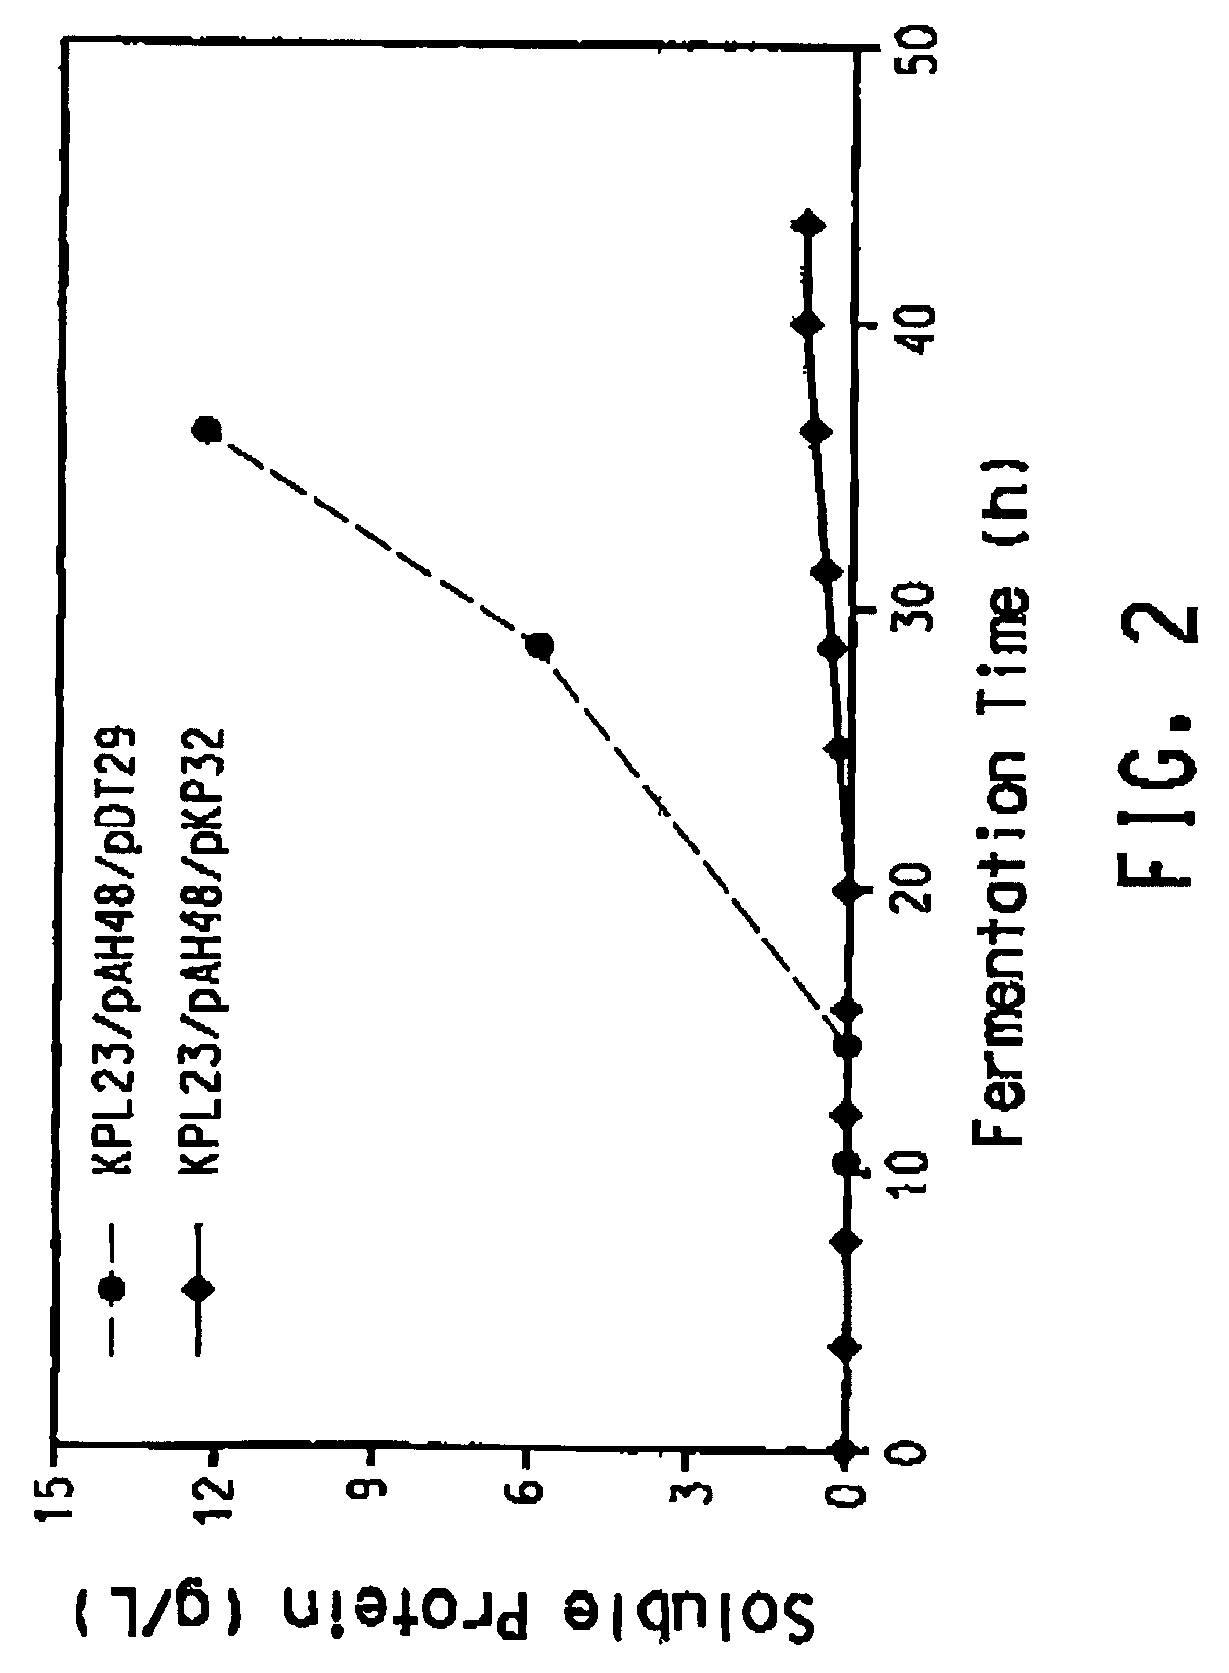 Process for the biological production of 1,3-propanediol with high titer